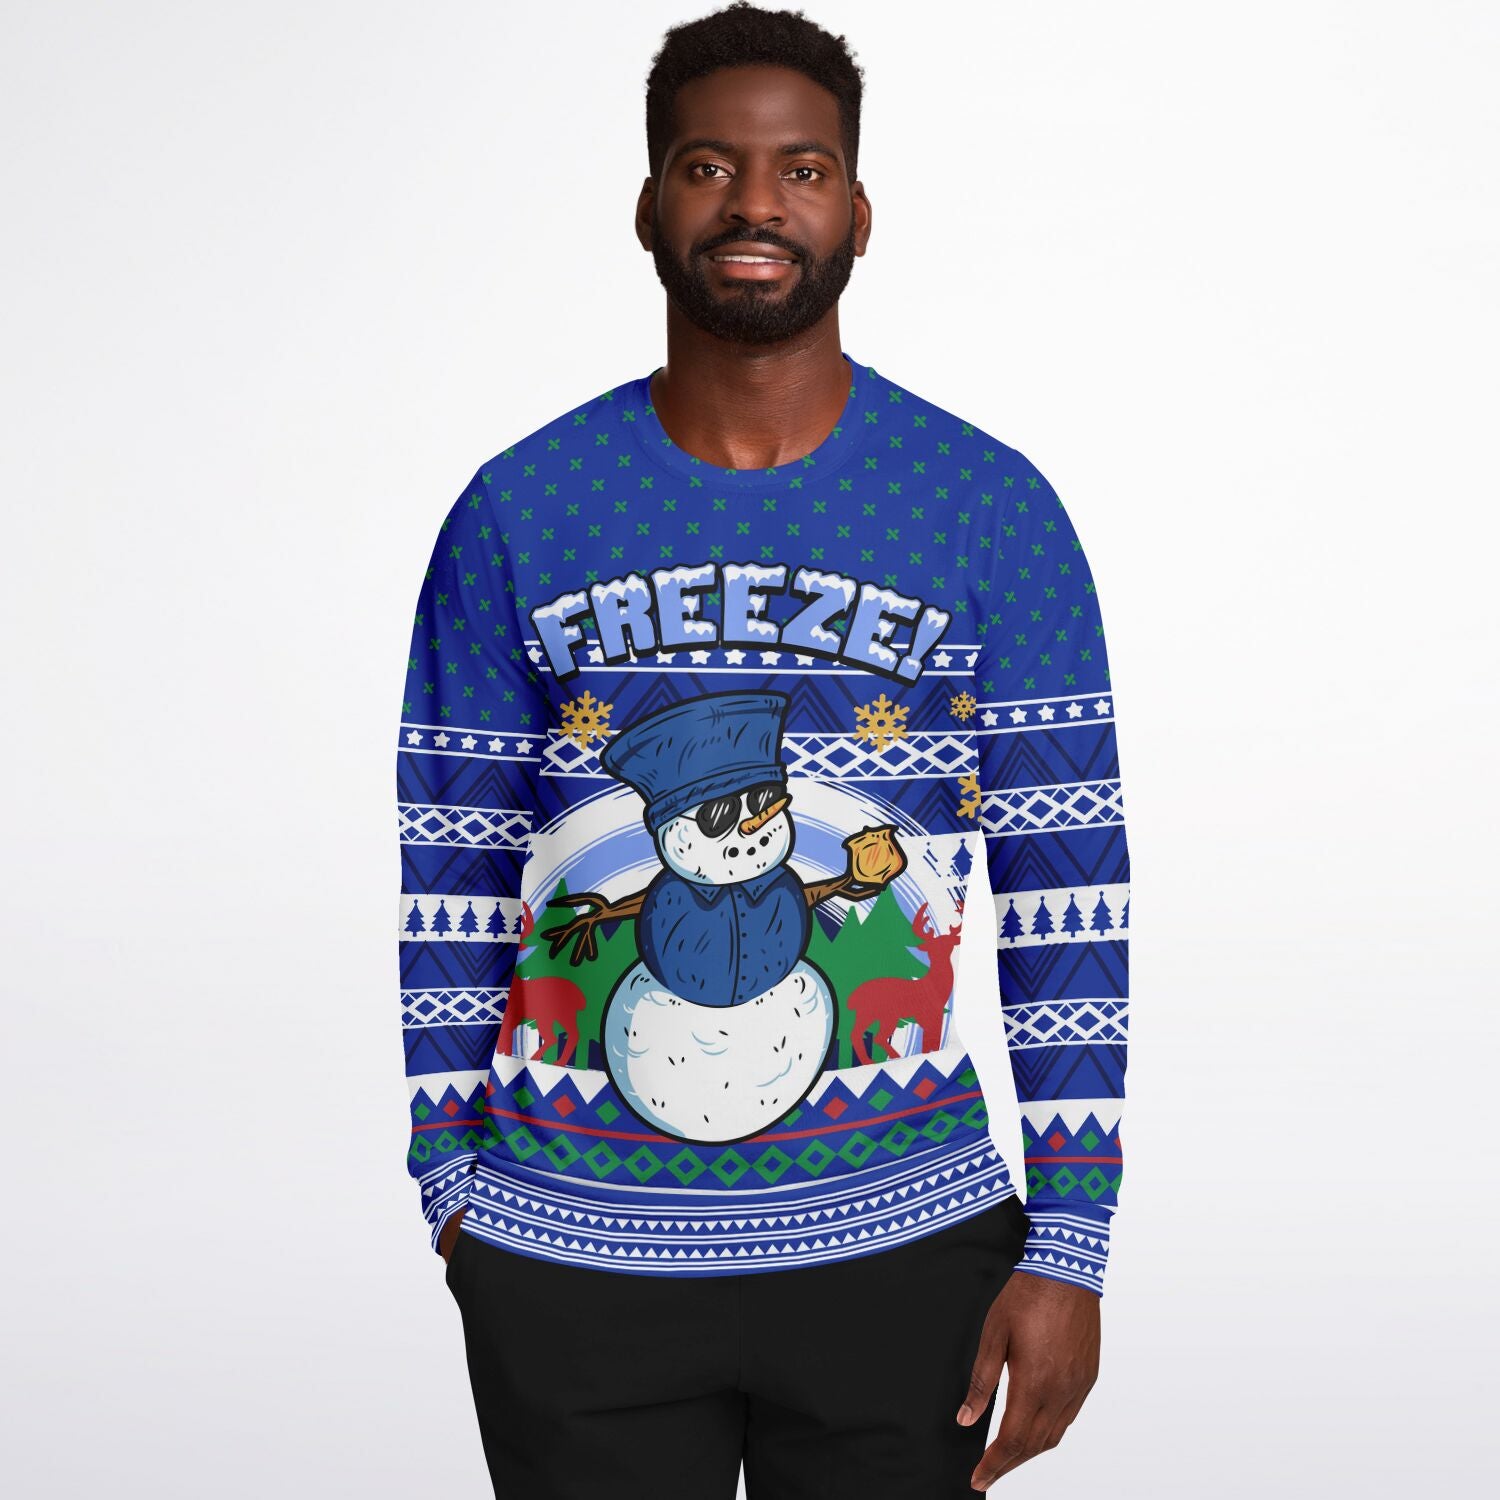 Snowman Freeze Police Officer | Unisex Ugly Christmas Sweater, Xmas Sweater, Holiday Sweater, Festive Sweater, Funny Sweater, Funny Party Shirt